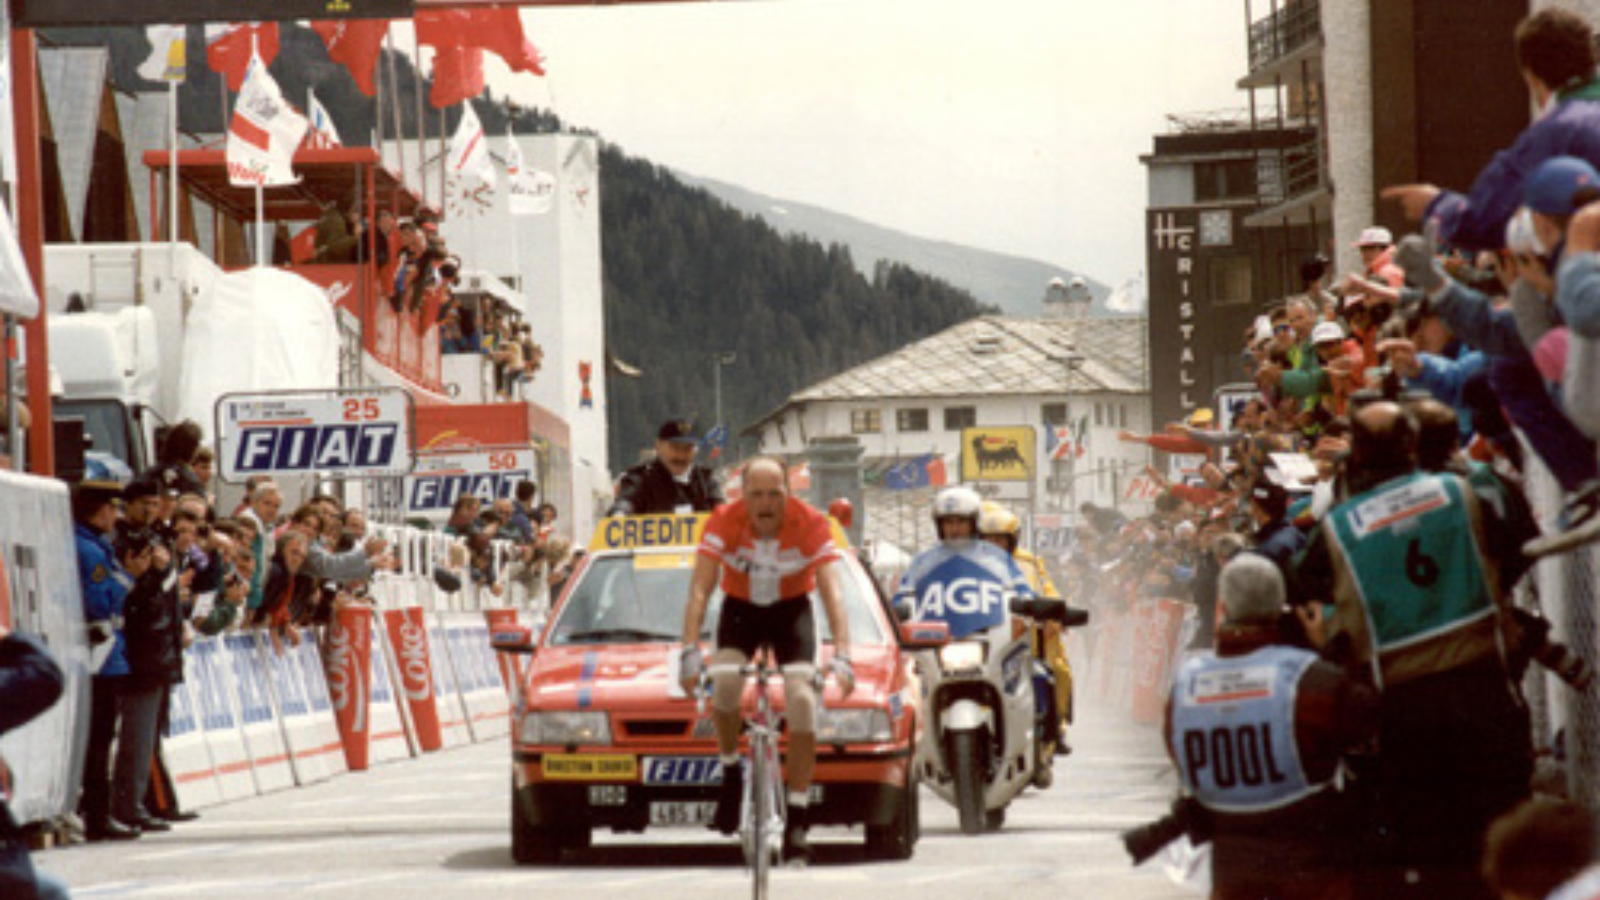 Bjarne Riis wins a shortened, 46 km long stage in the Alps at Tour de France 1996